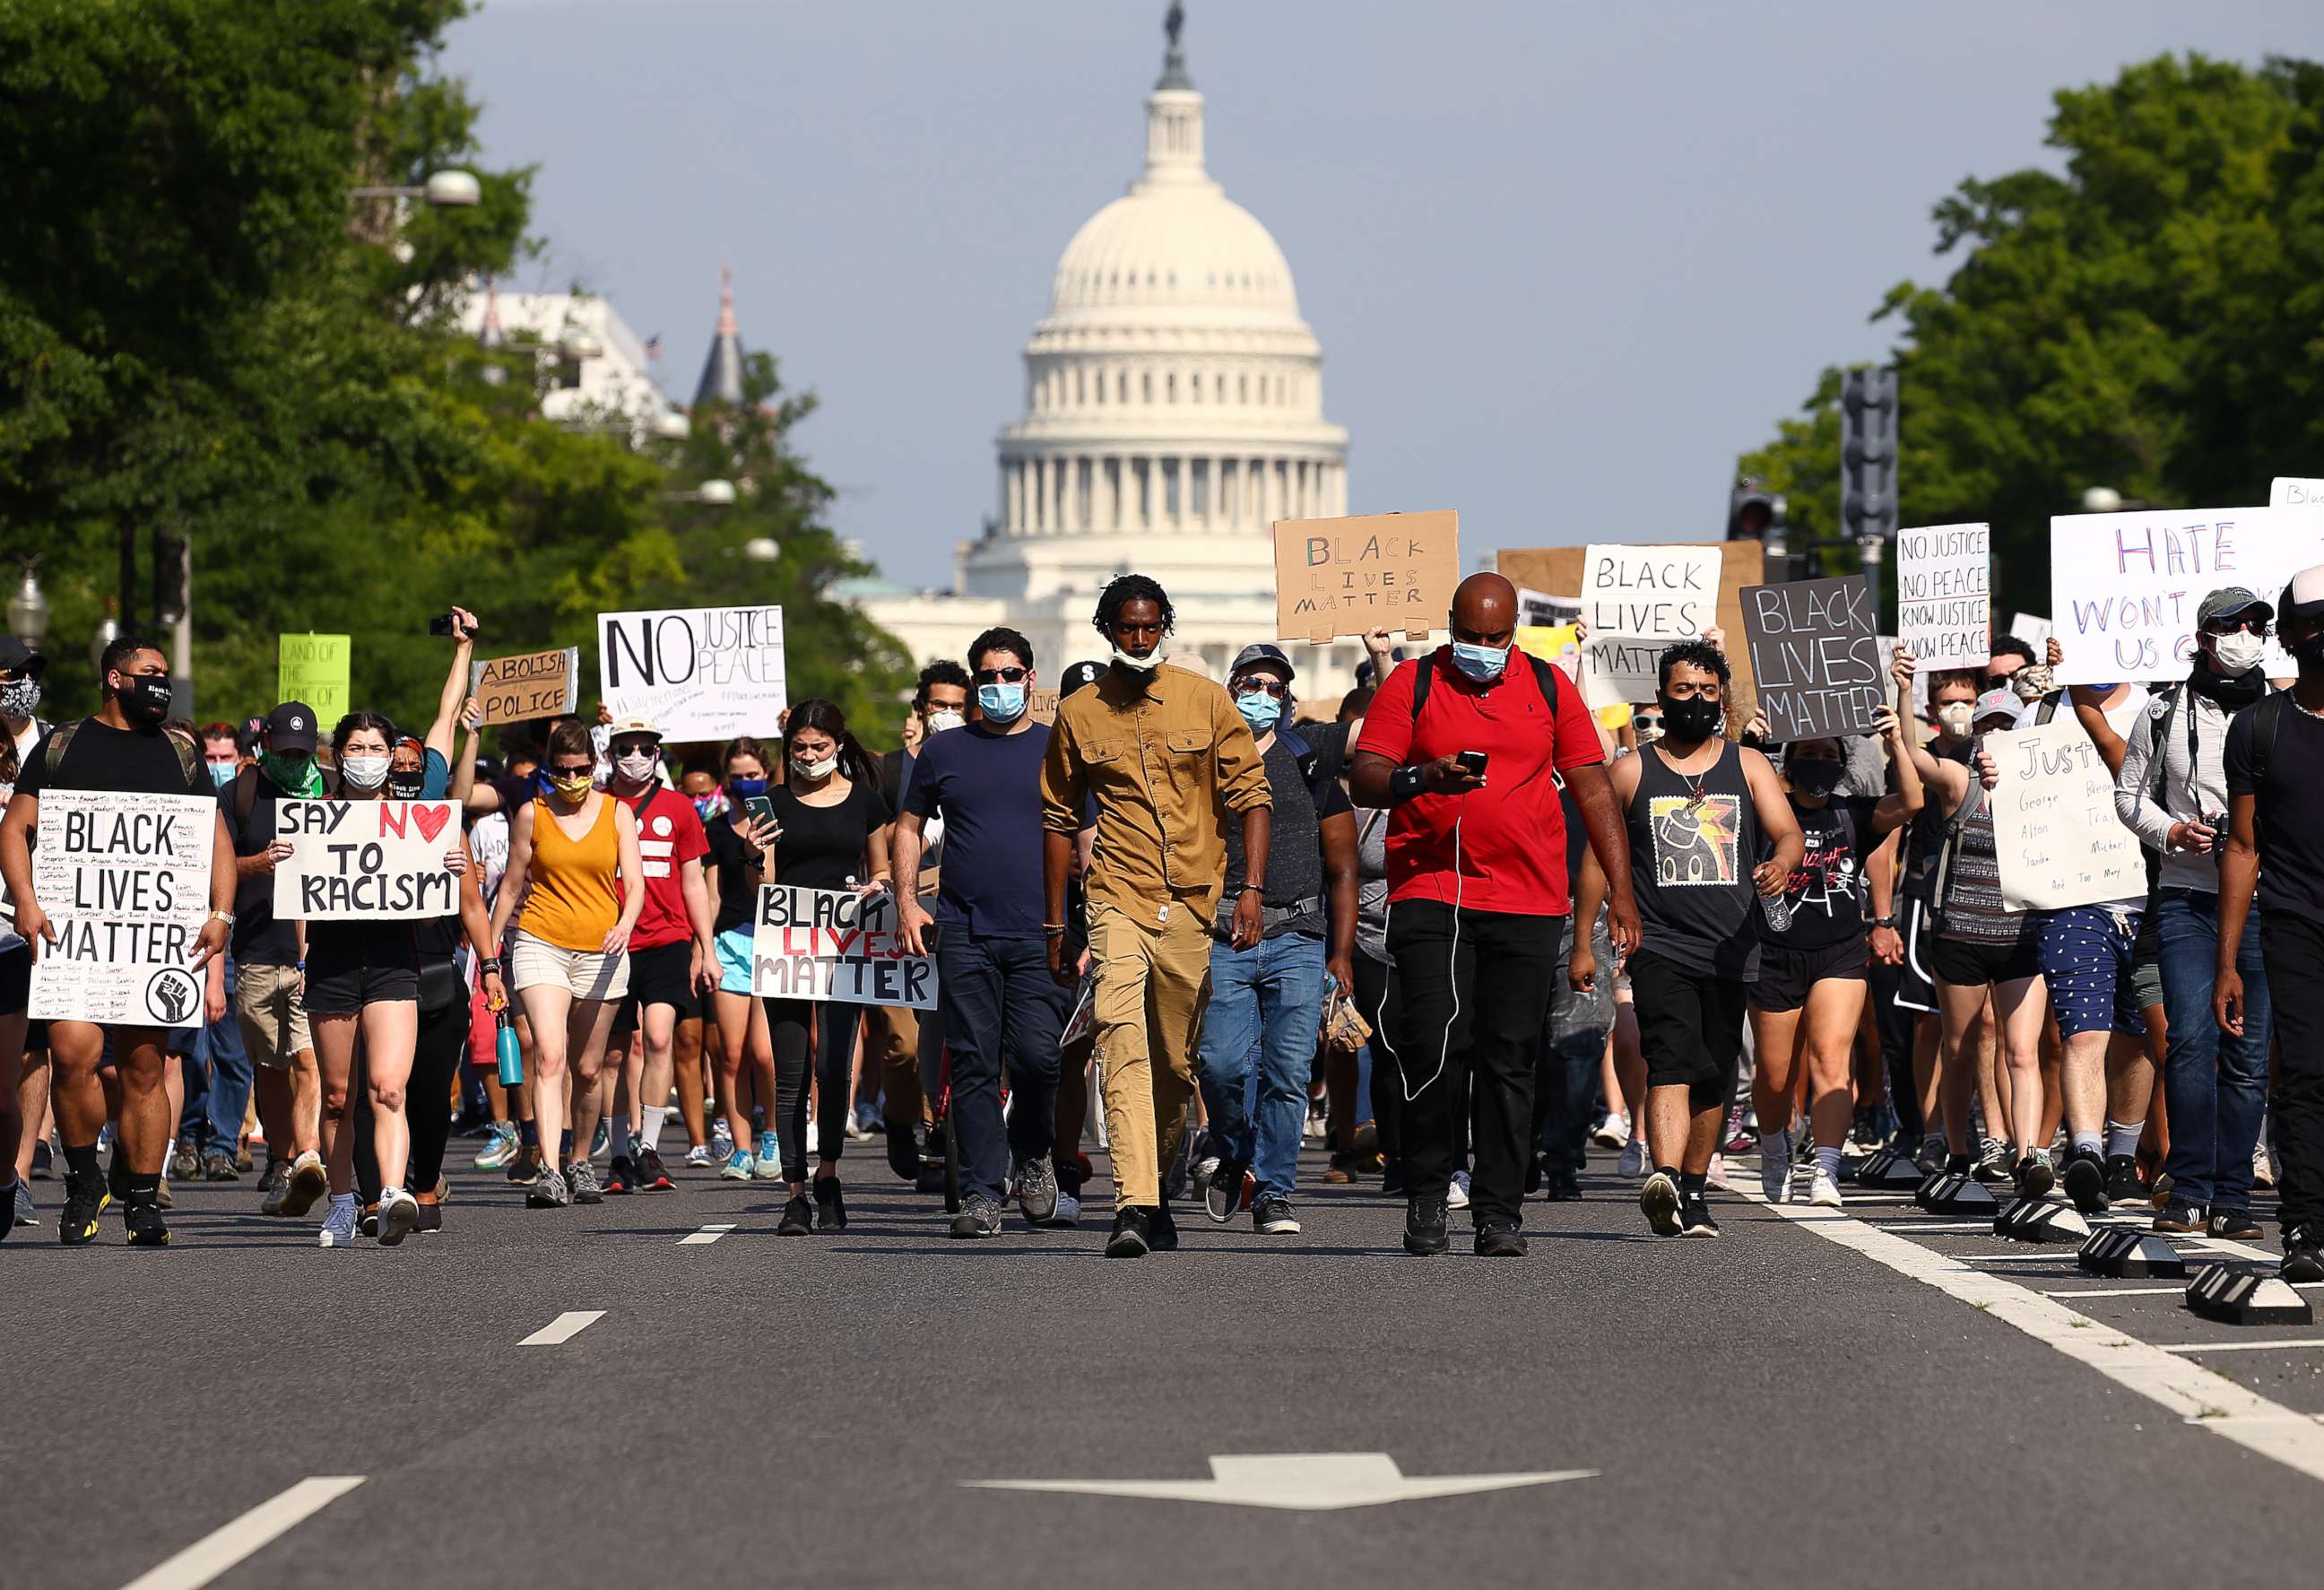 PHOTO: Demonstrators march down Pennsylvania Avenue during a protest against police brutality and the death of George Floyd, on June 3, 2020, in Washington, D.C.